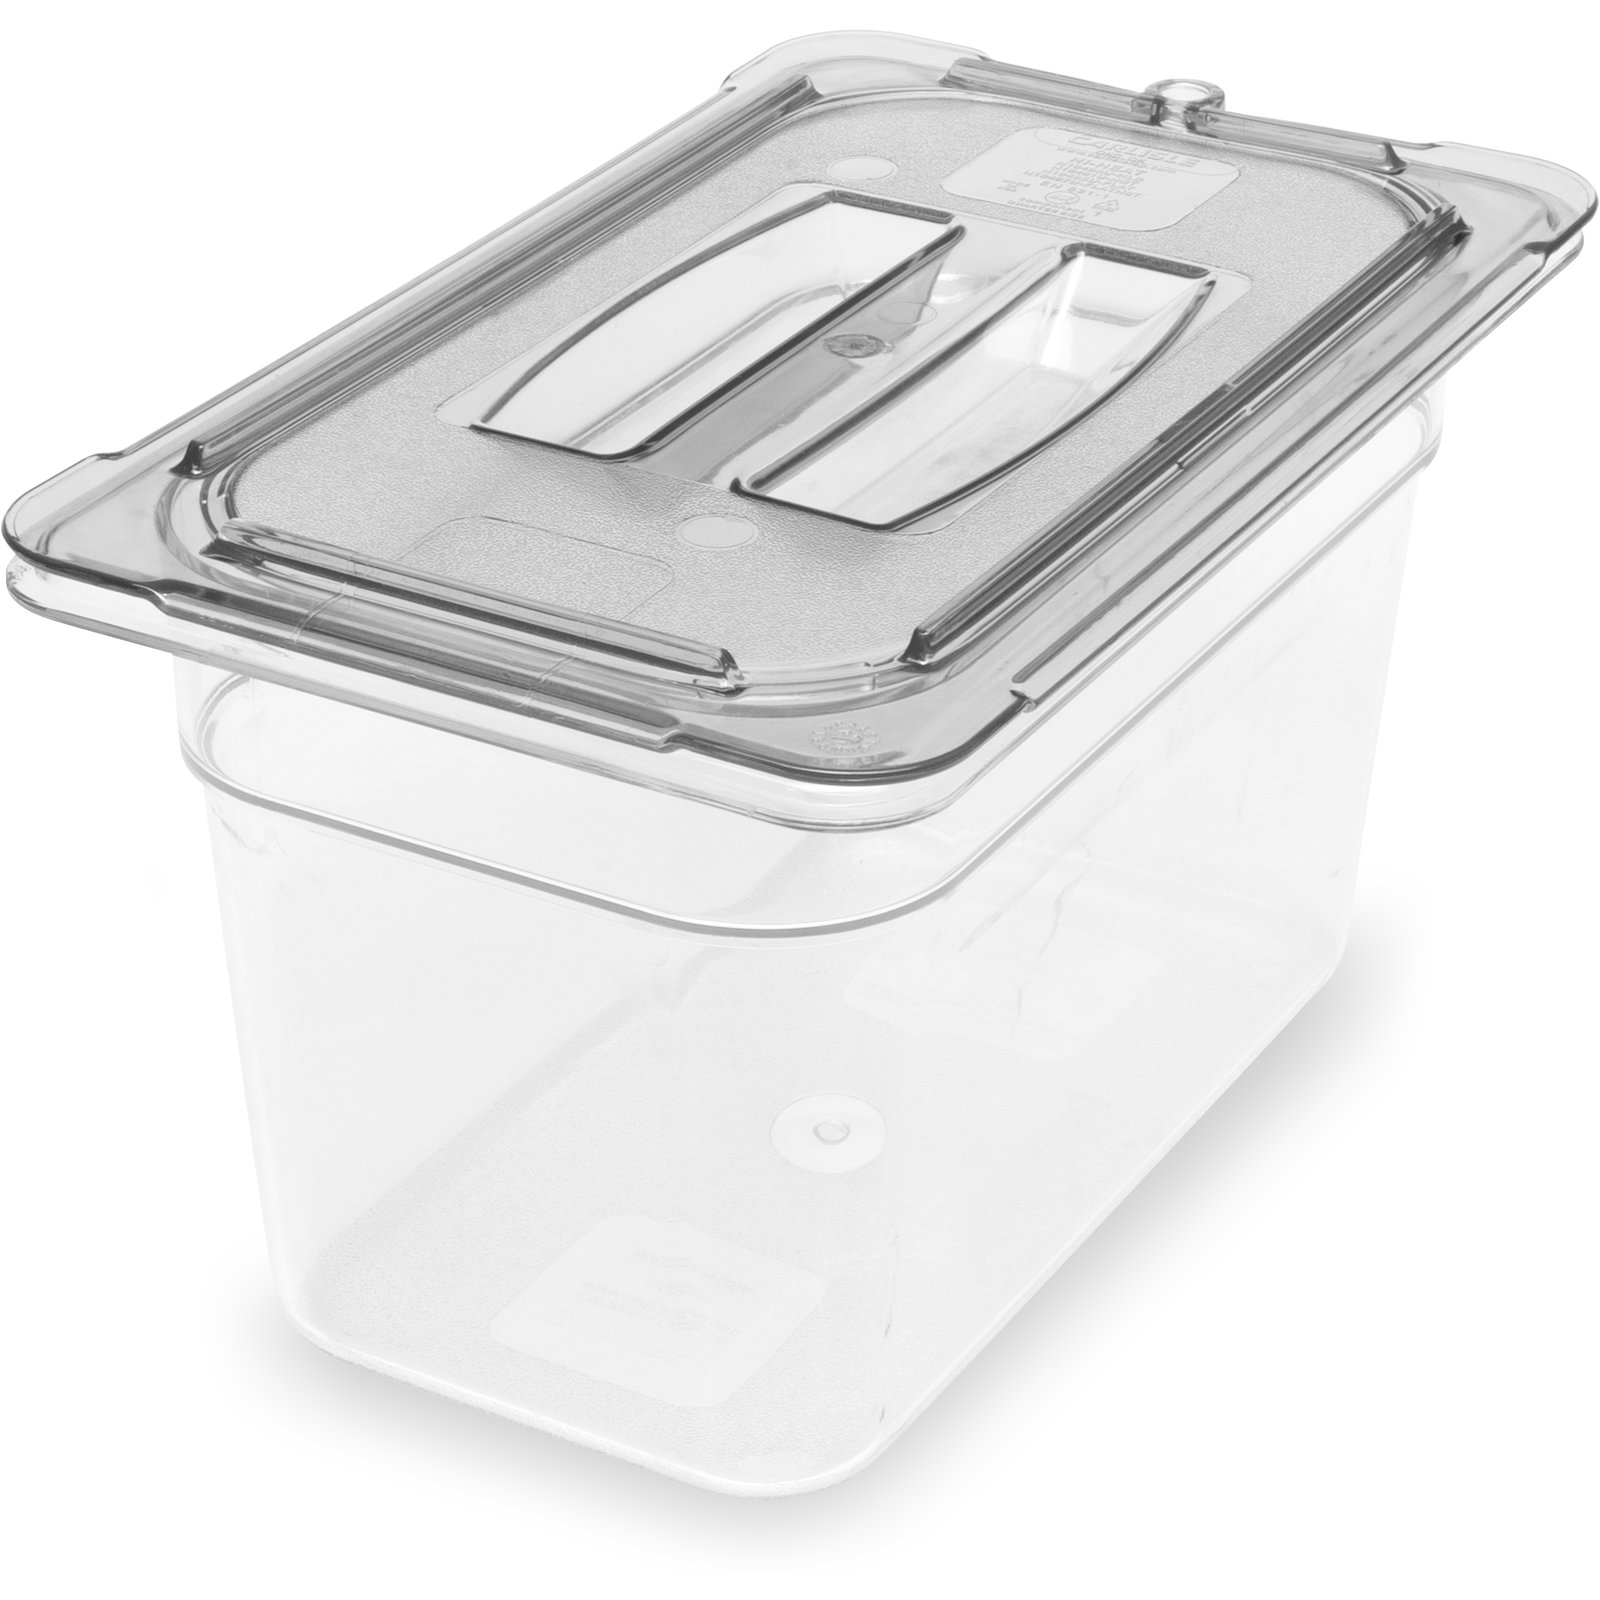 CURTA 6 Pack NSF Food Pans, 1/6 Size 4 Inch Deep Commercial Food Storage  Containers, Polycarbonate, Clear